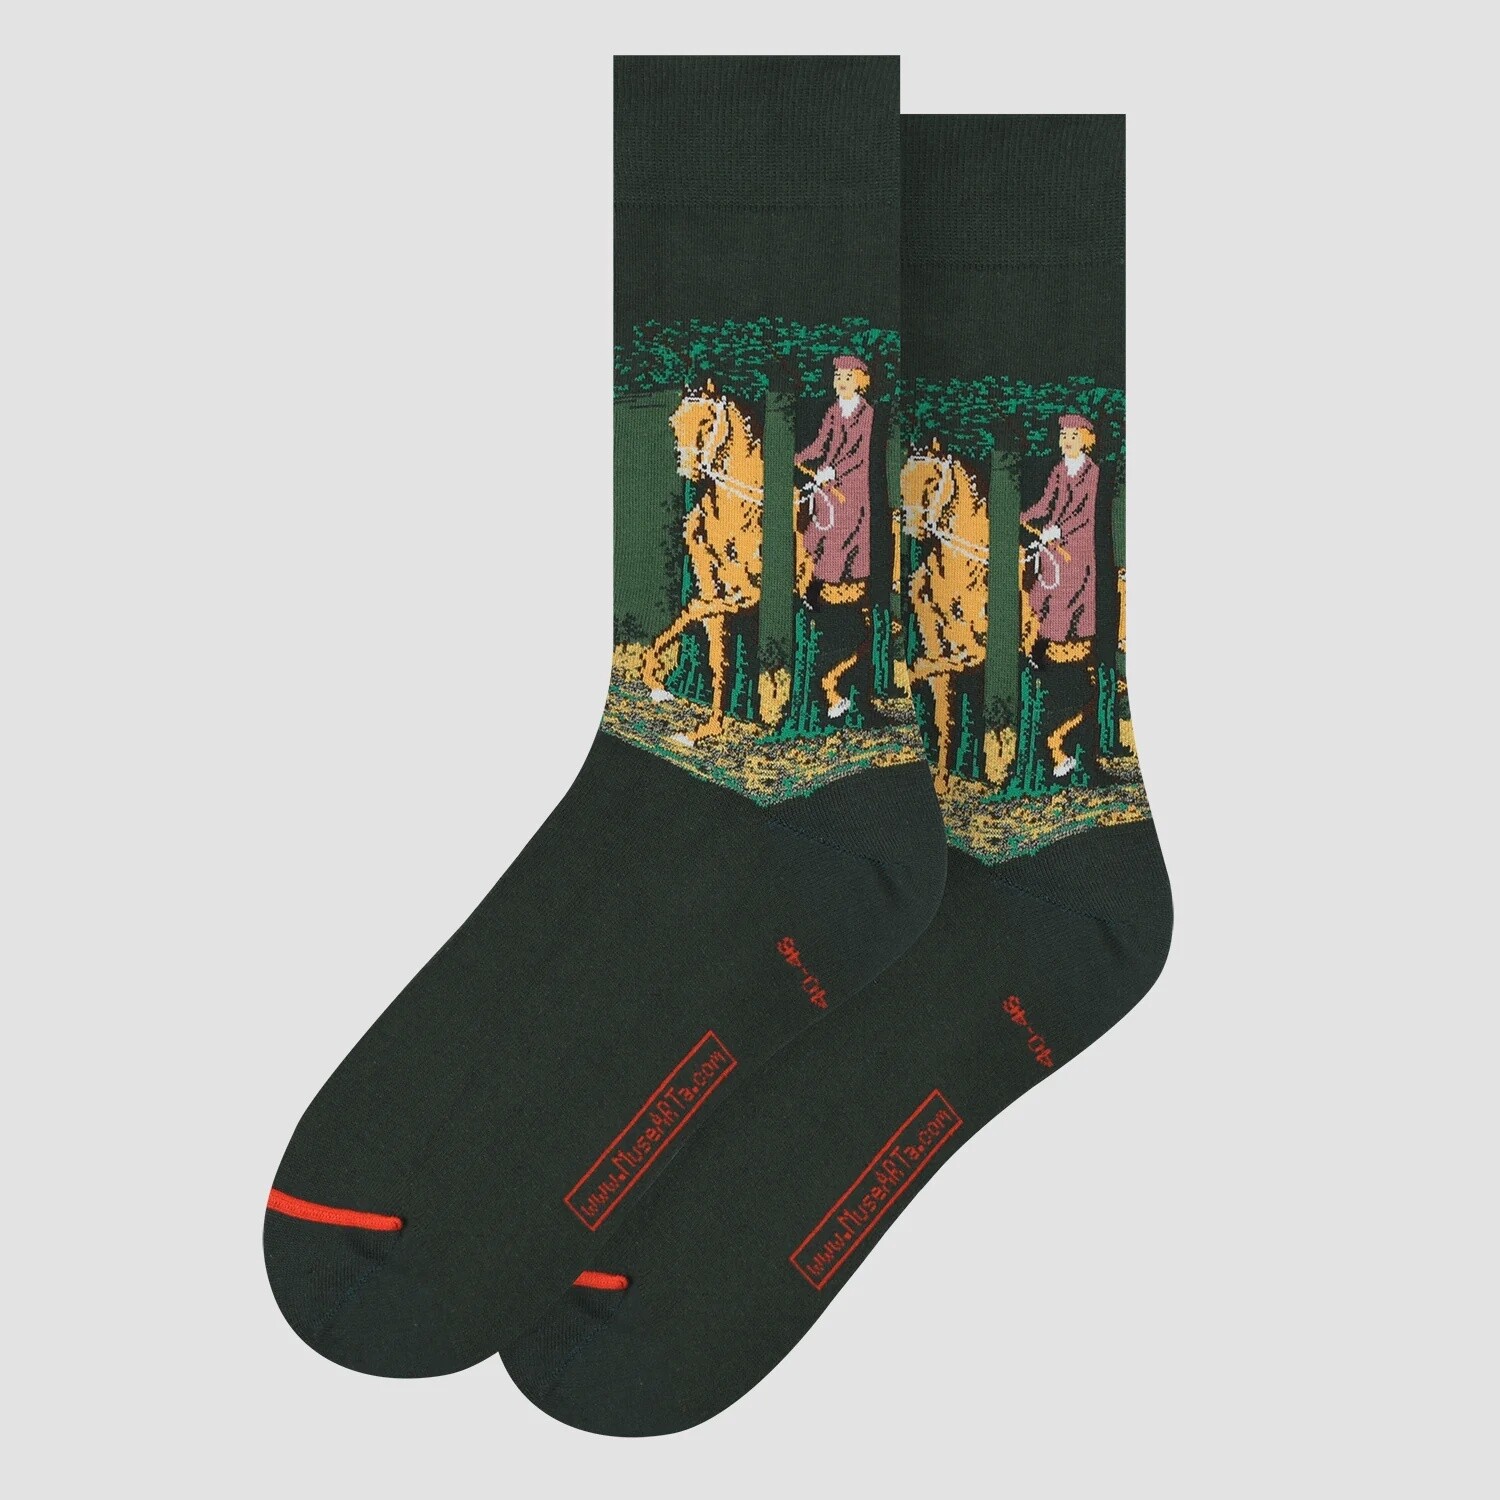 “The Blank Signature” by Rene Magritte Socks